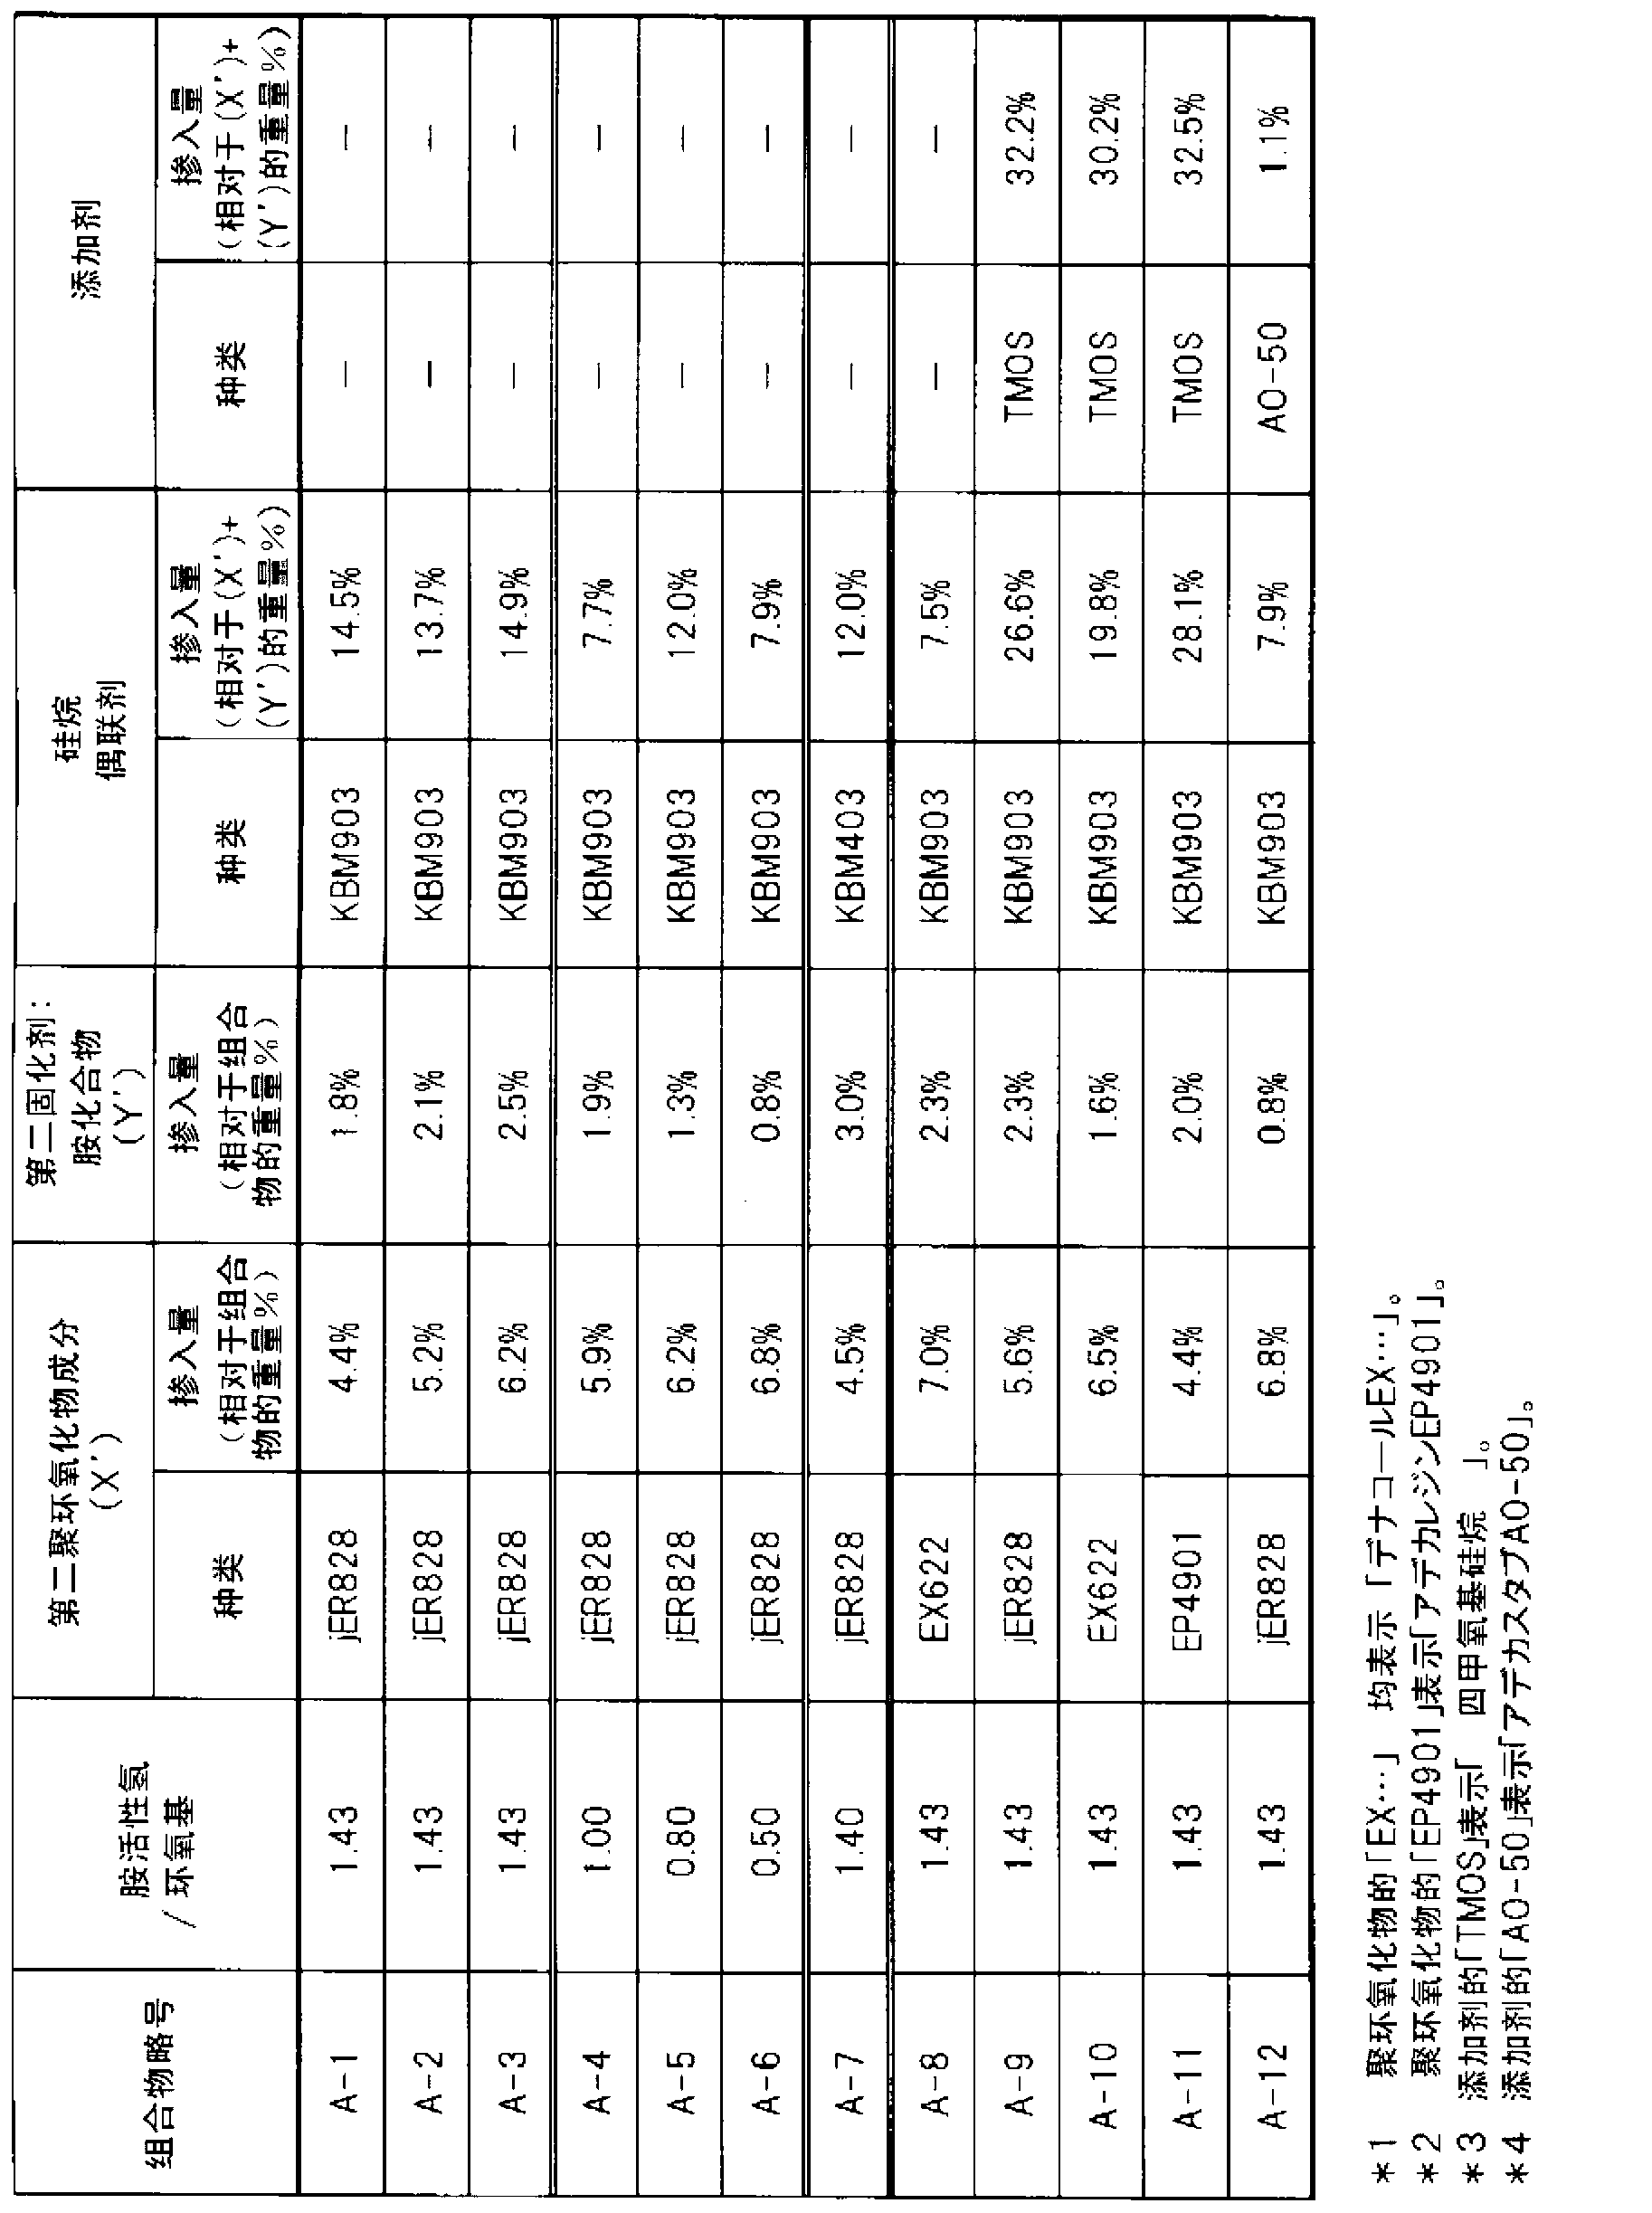 Anti-fogging article and method for producing same